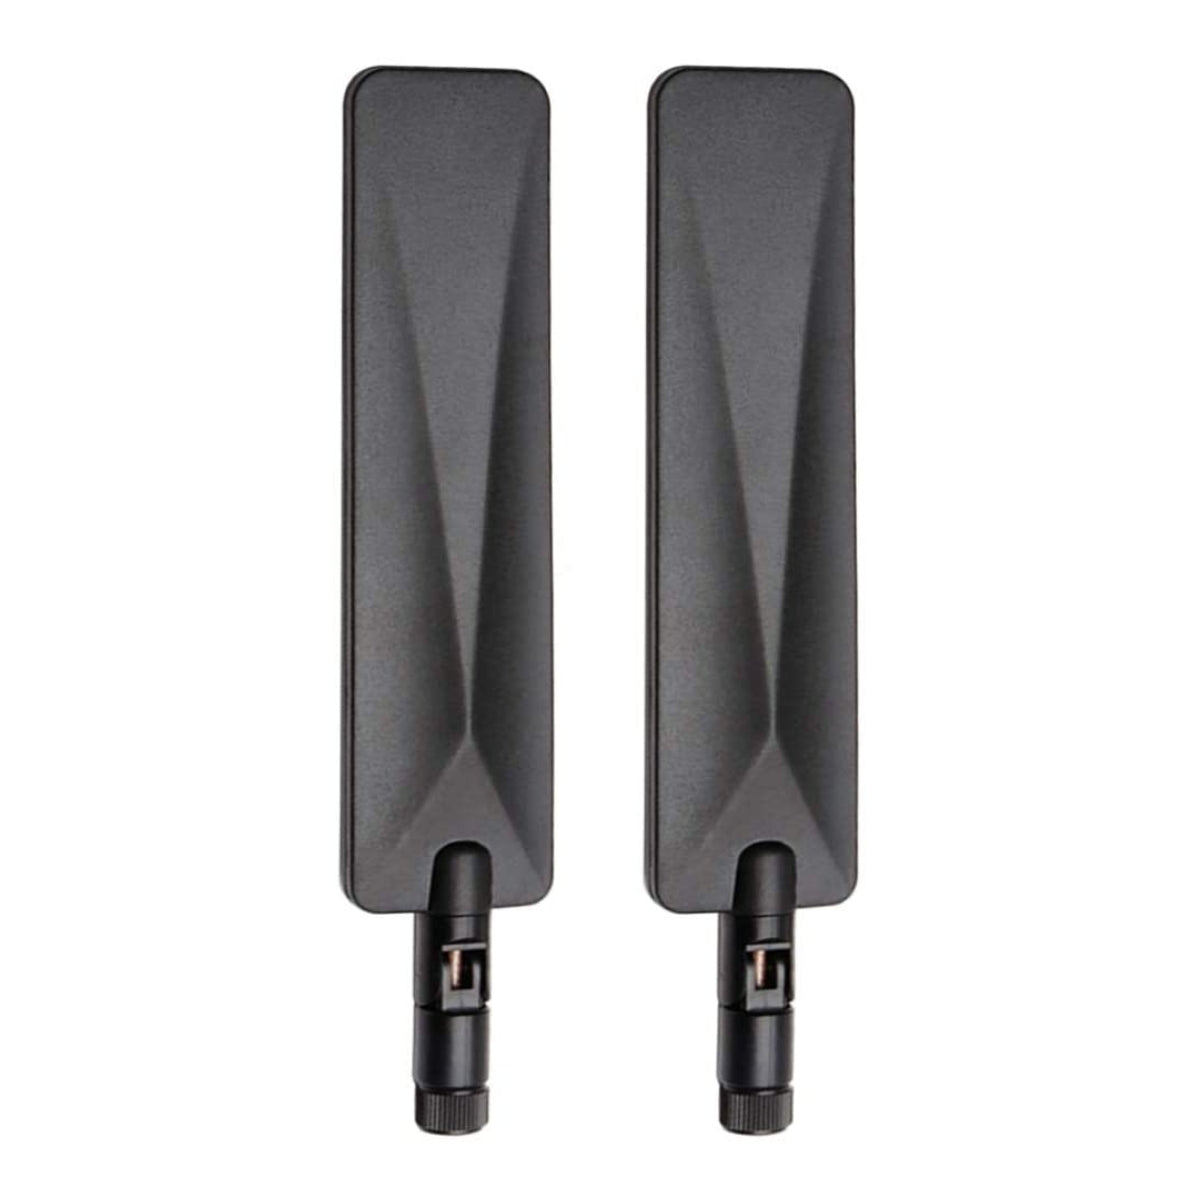 600-3800MHz Cellular Omni-Directional Paddle Antennas (SMA Connectors) PAIR